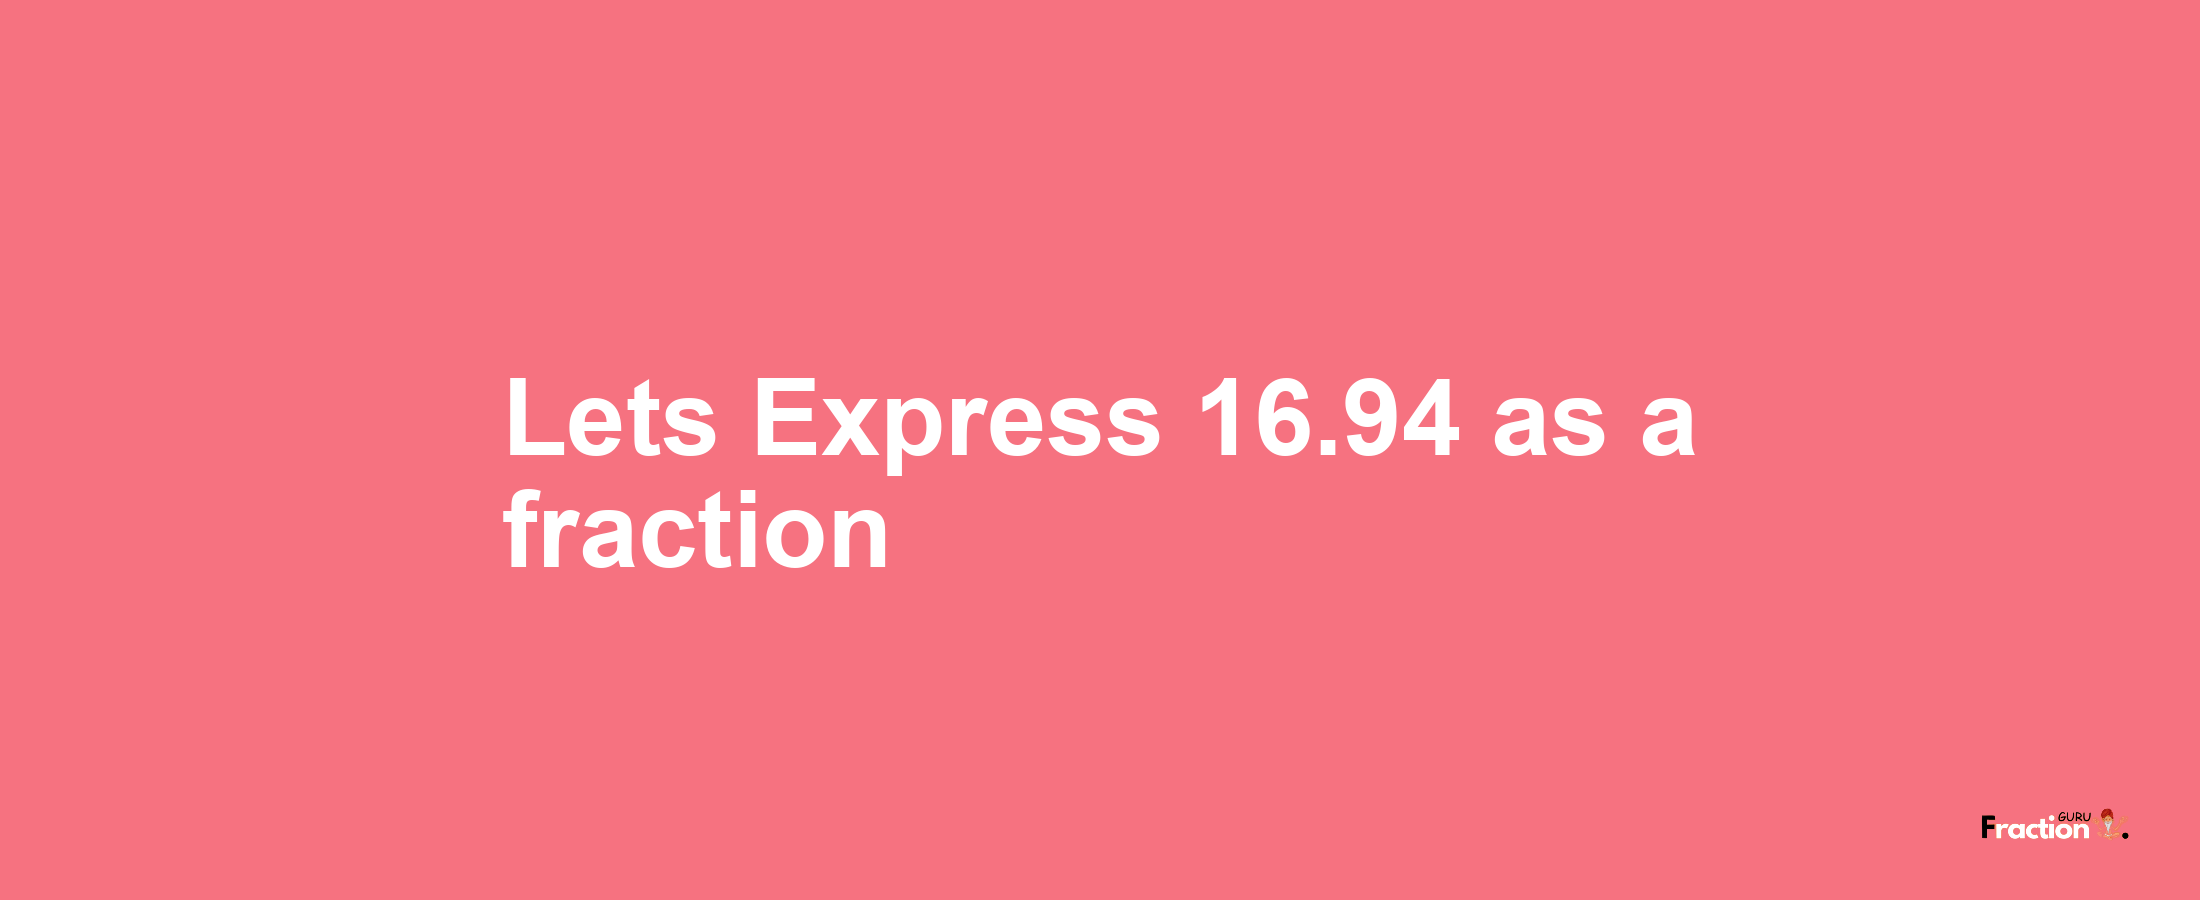 Lets Express 16.94 as afraction